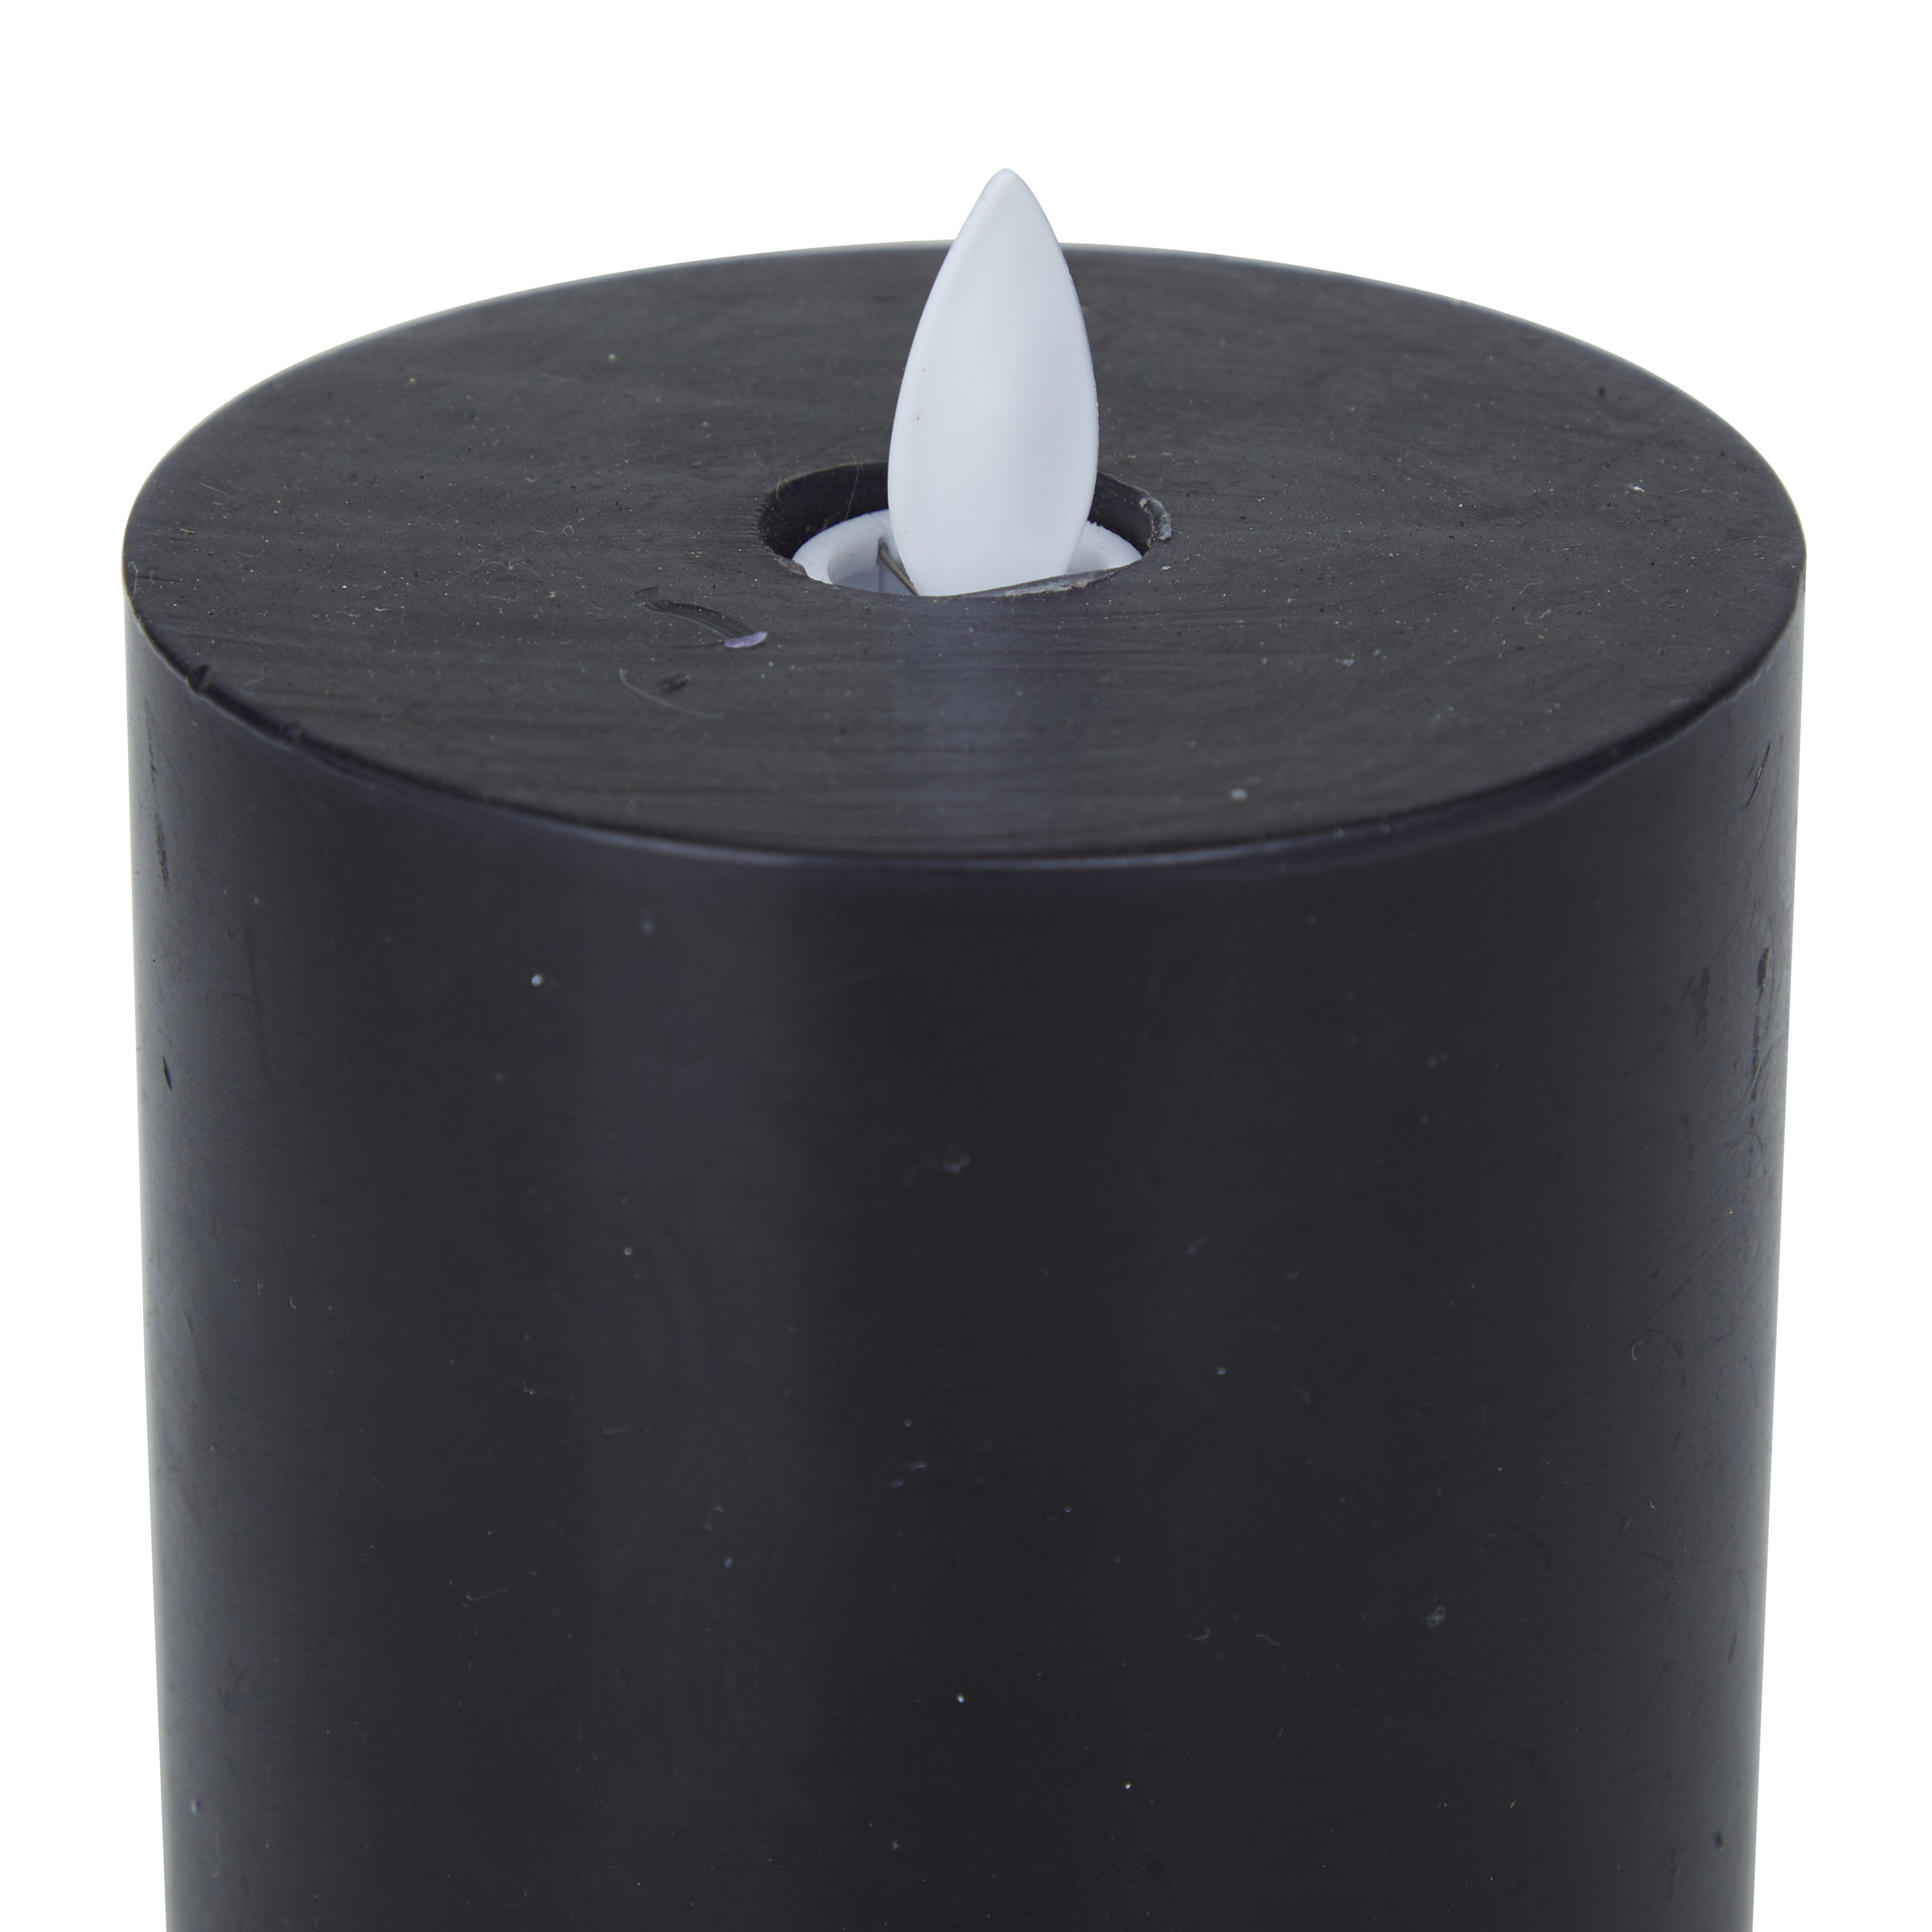 Black Flameless Lighter – The Roosevelts Candle Co.